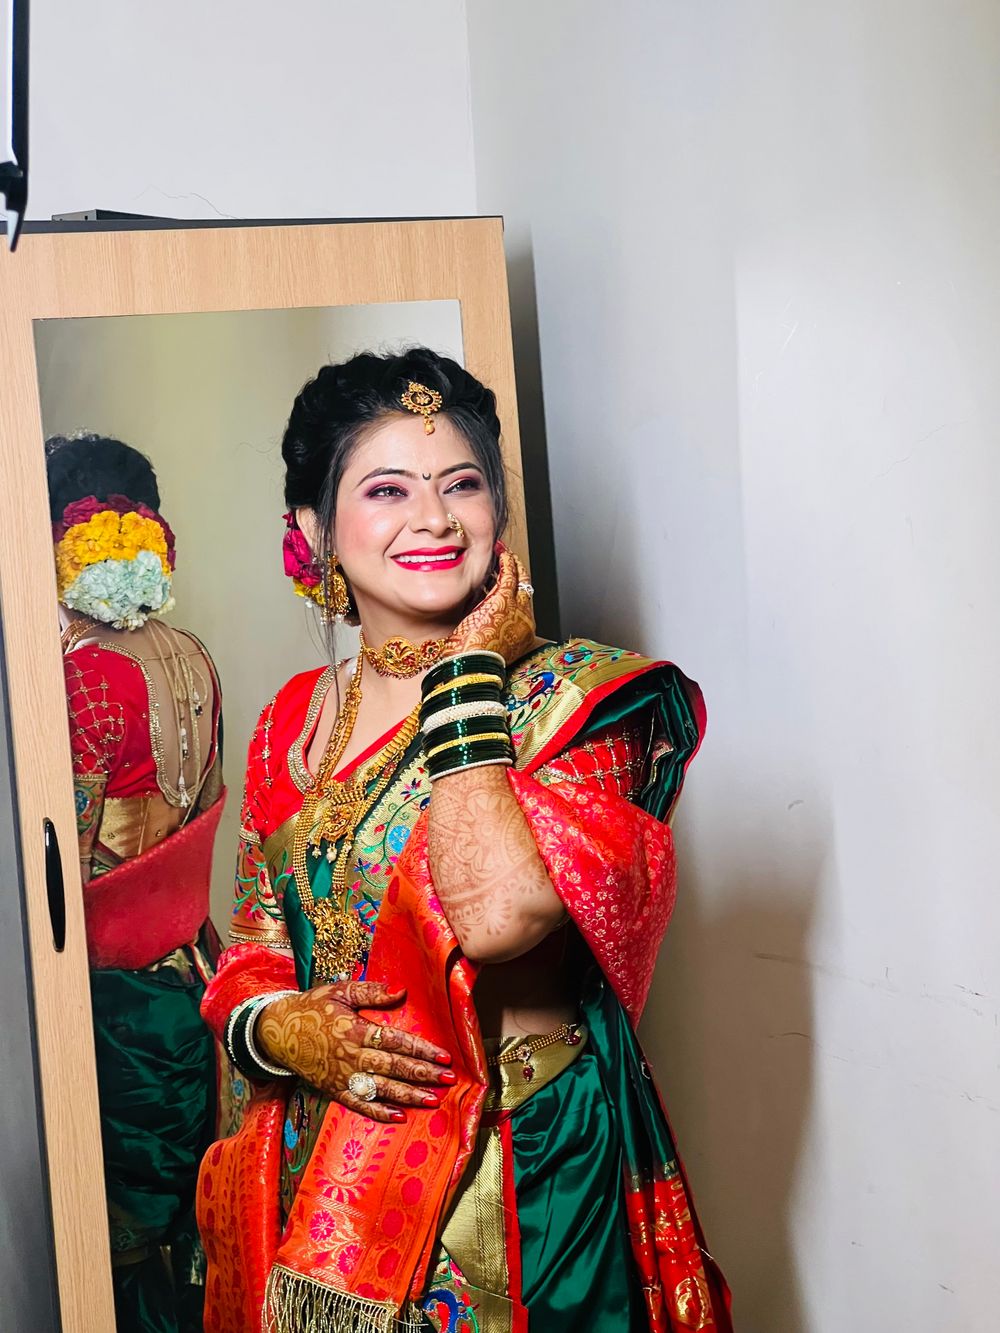 Photo From Bride Shraddha - By Jidus Makeover